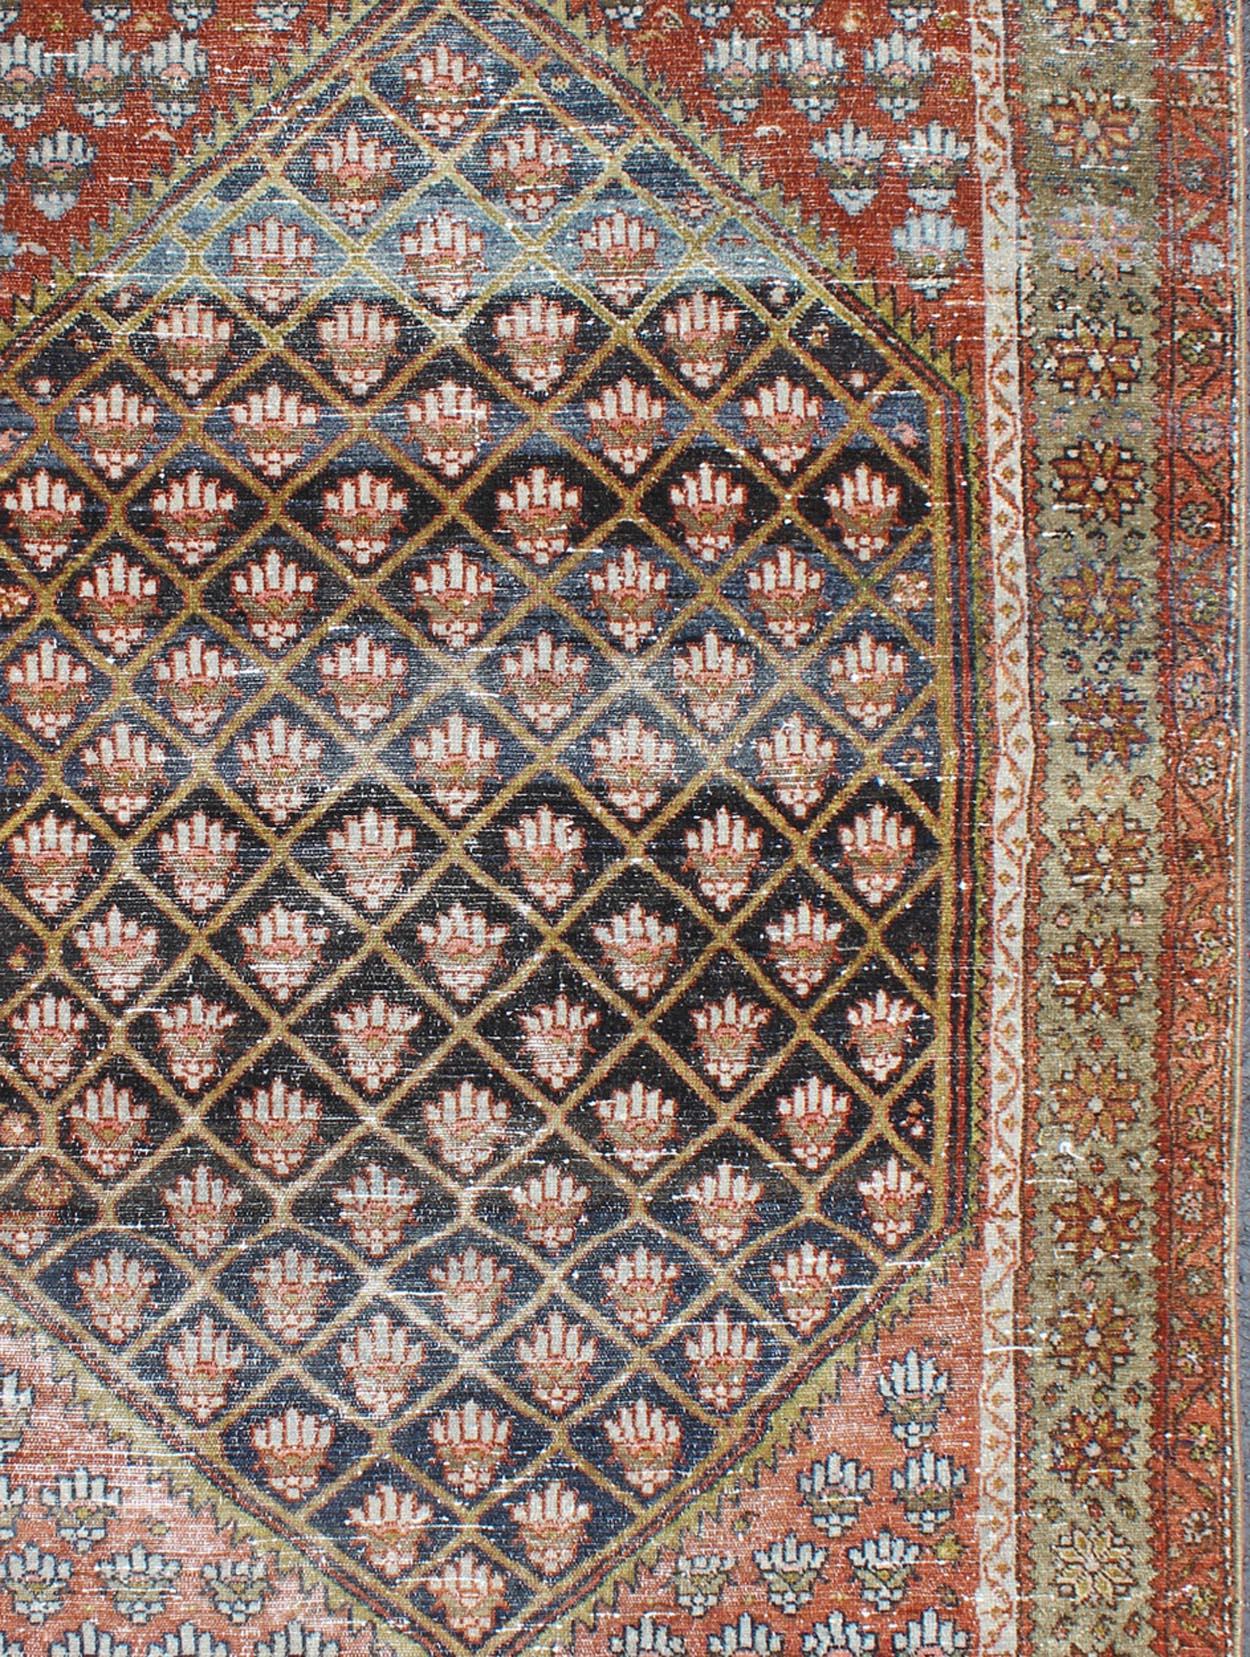 Antique Persian Hamadan rug with gorgeous blue and colorful design. Keivan Woven Arts / rug GNG-4762, country of origin / type: Iran / Hamadan, circa 1920.

This antique Persian Hamadan rug (circa early 20th century) features a unique blend of